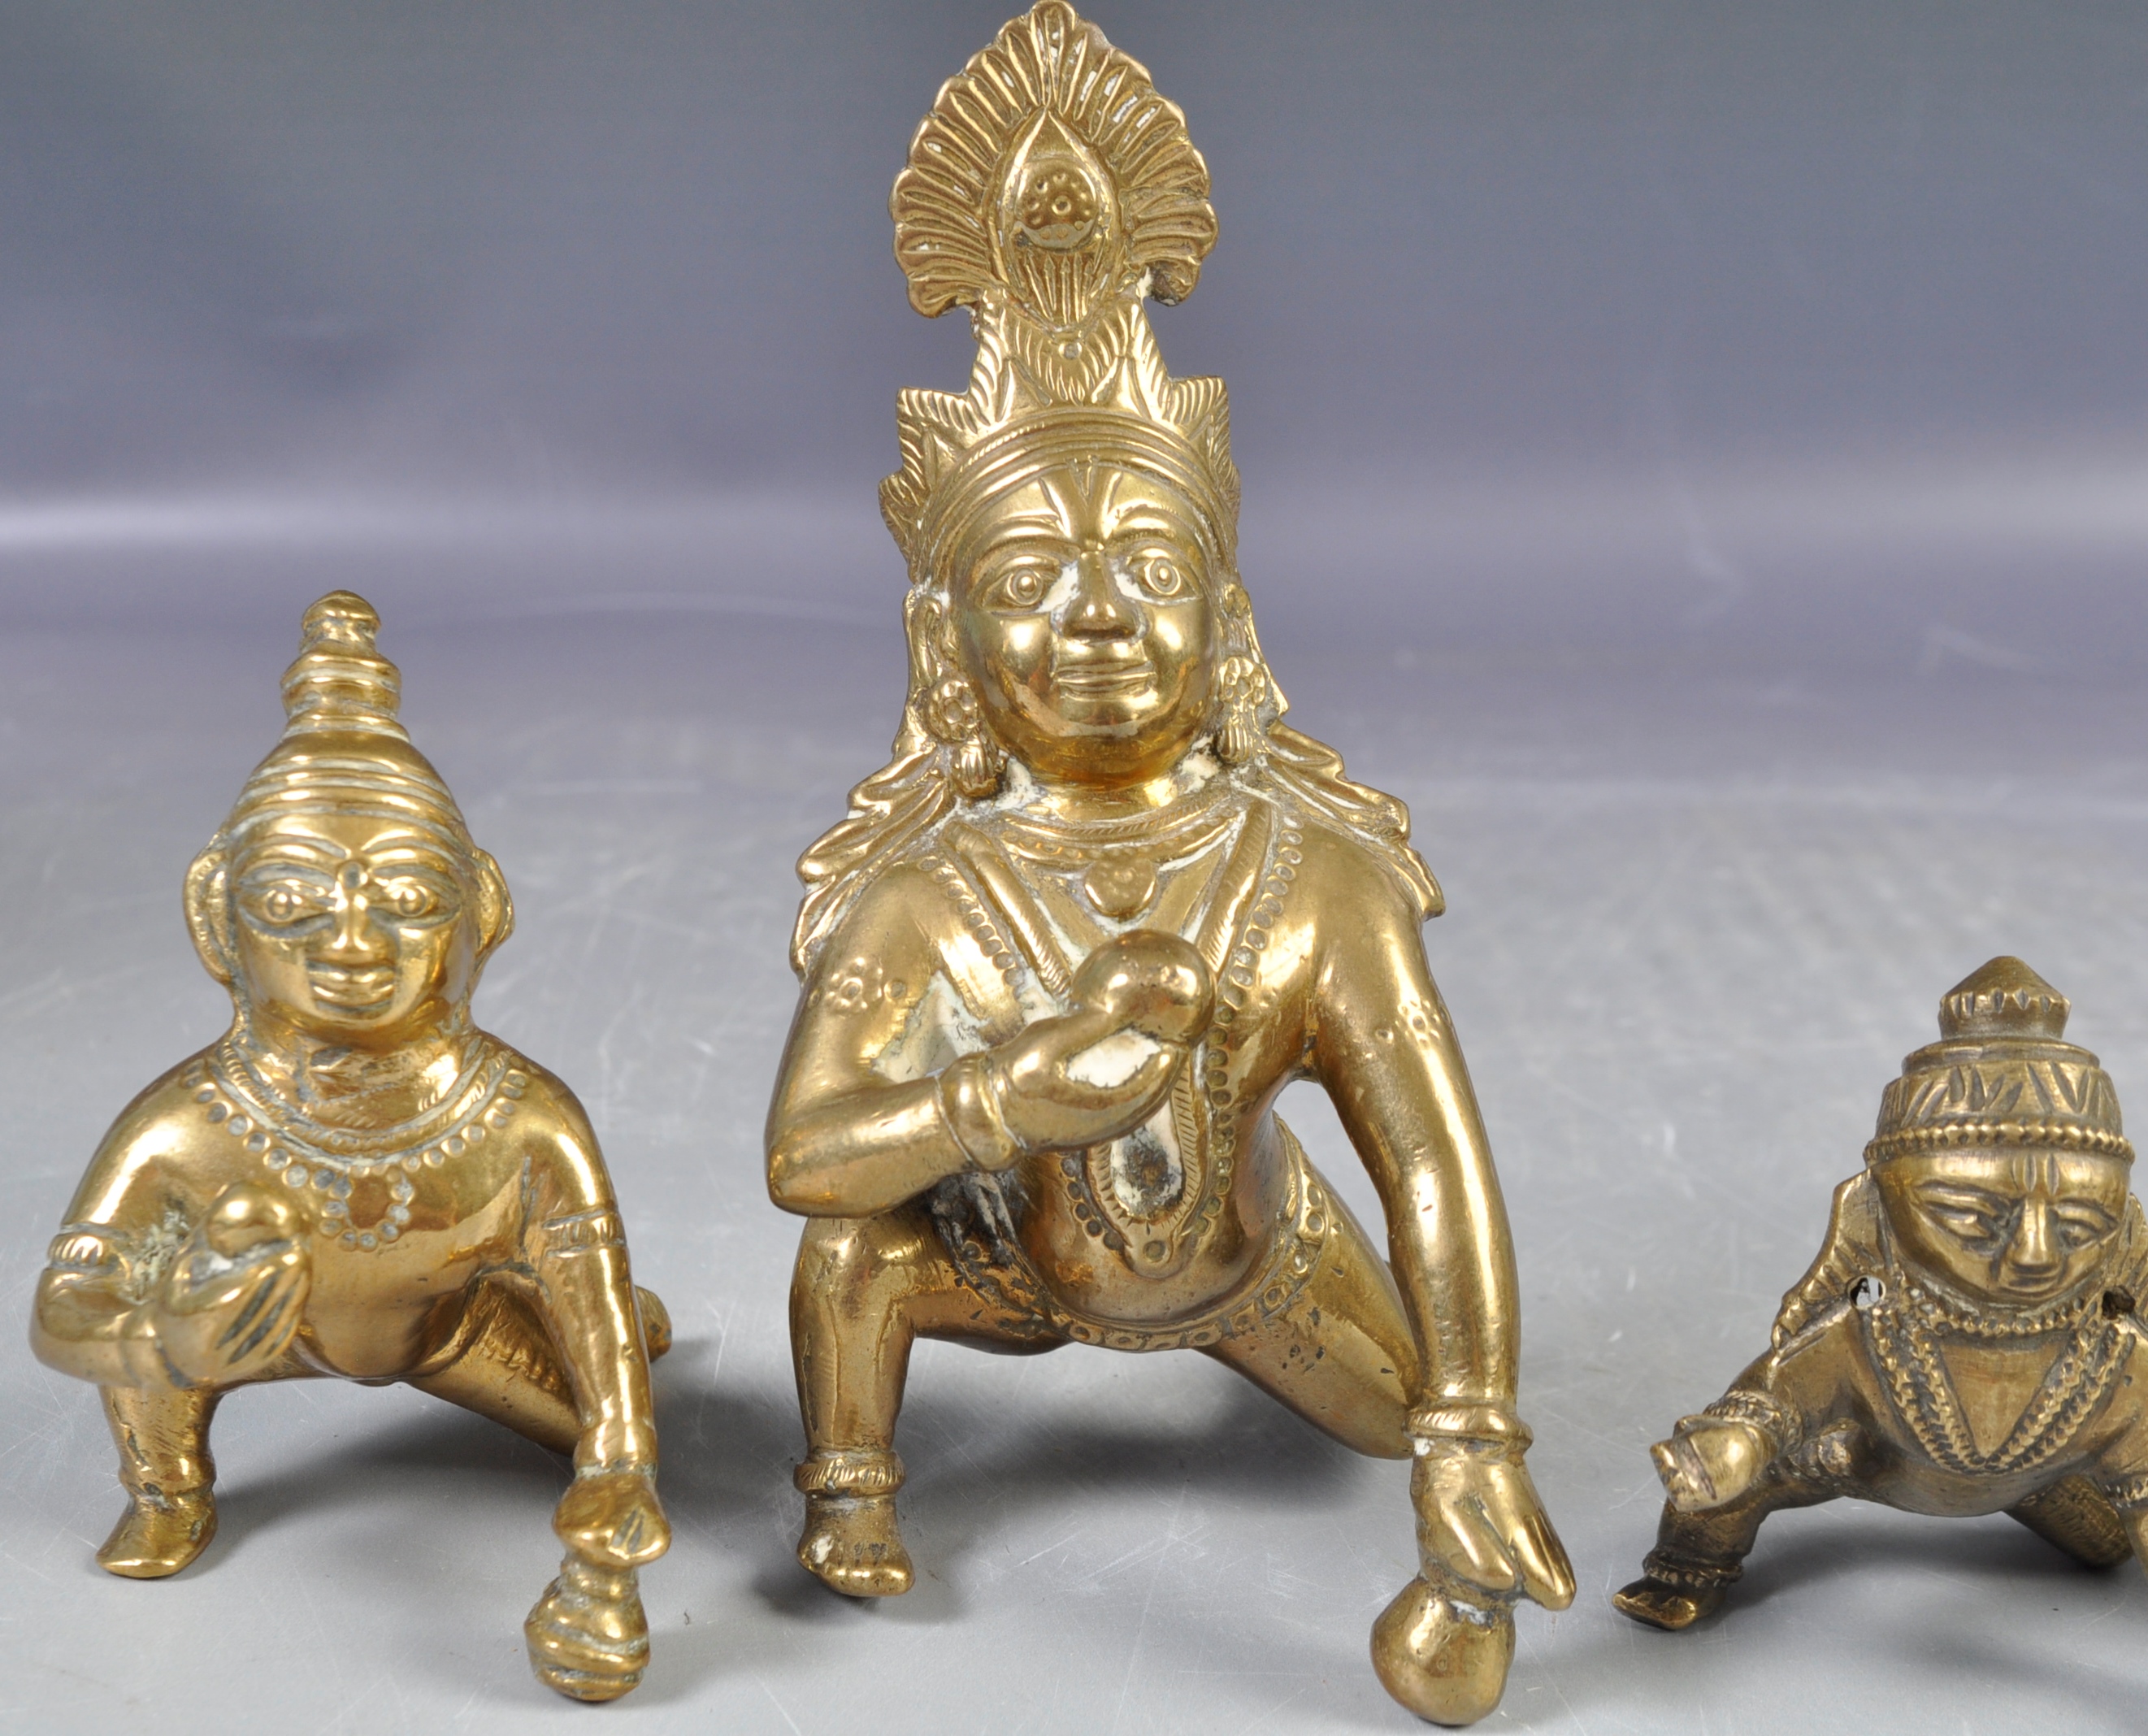 COLLECTION OF ANTIQUE FIGURES OF BOY KRISHNA AND BUTTER BALL - Image 3 of 5